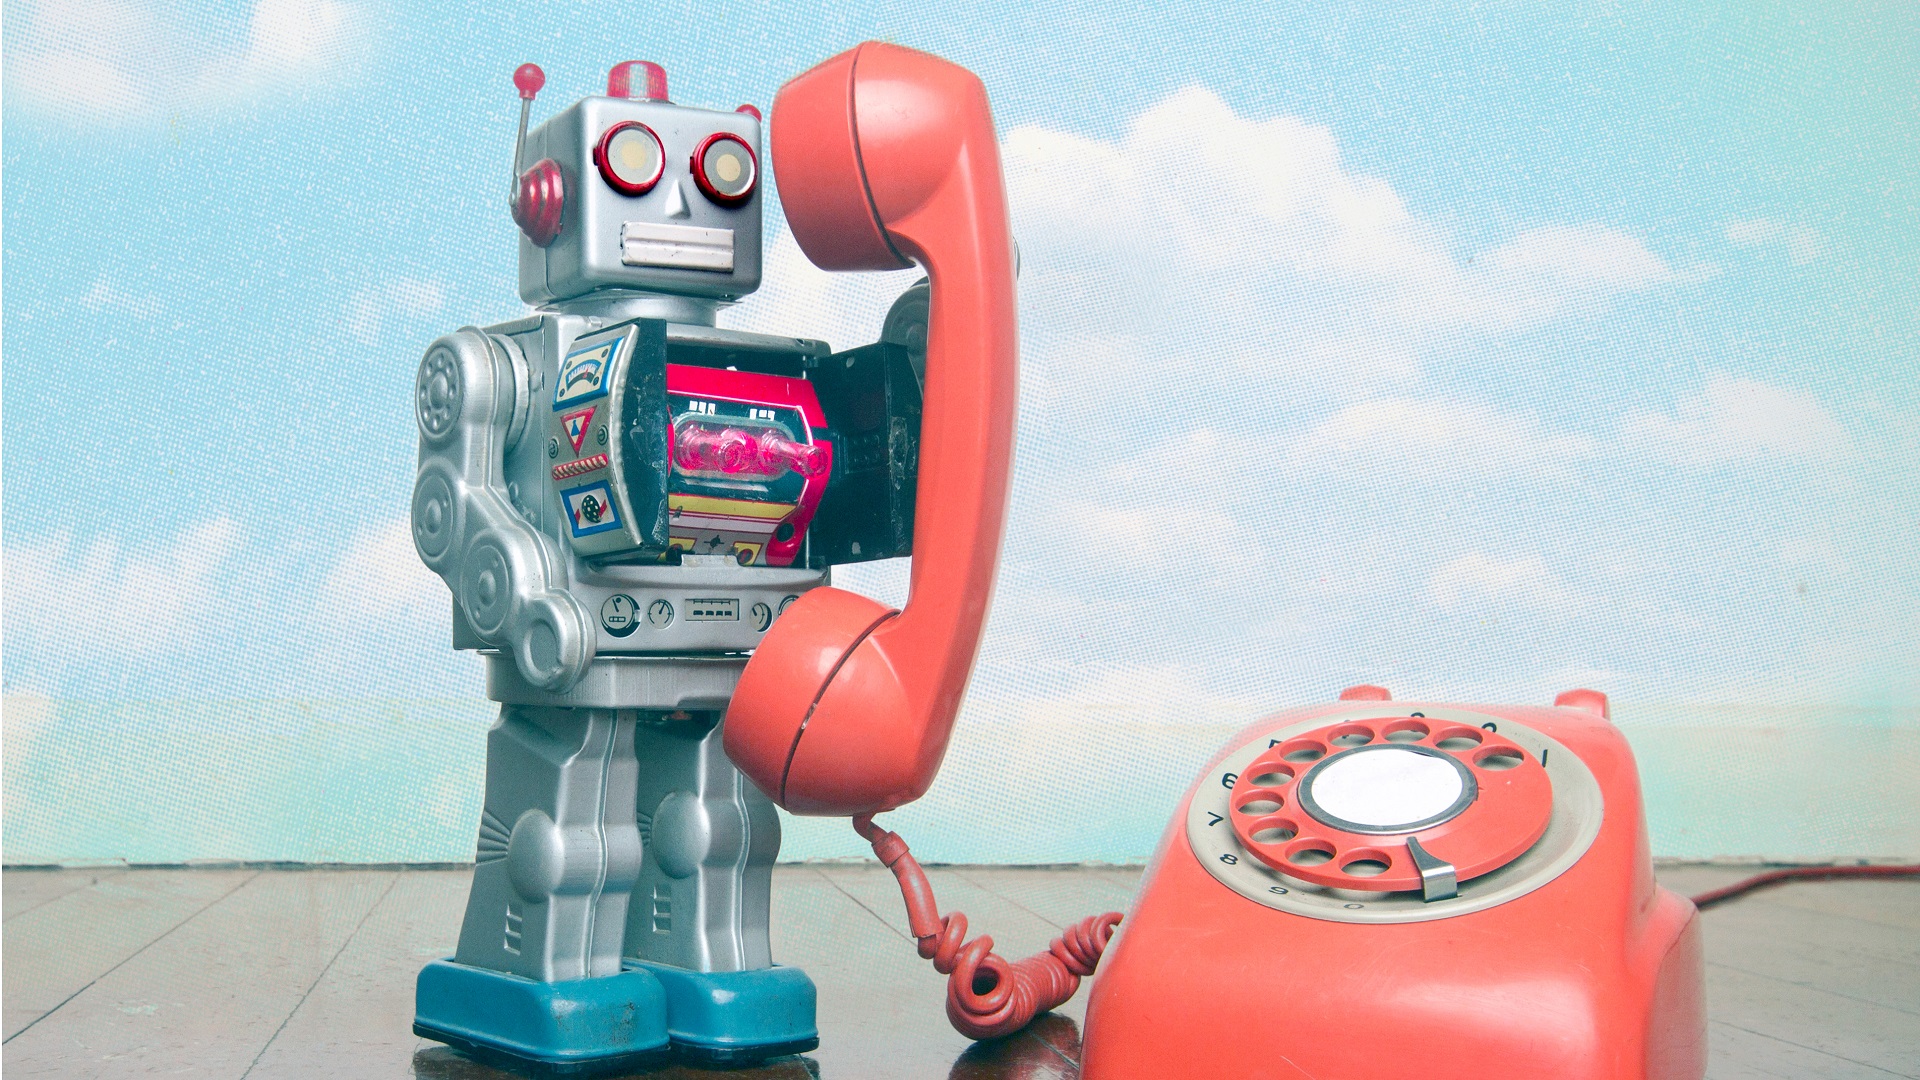 Contact Center Chat Bots: How To Use Them Without Impacting CX